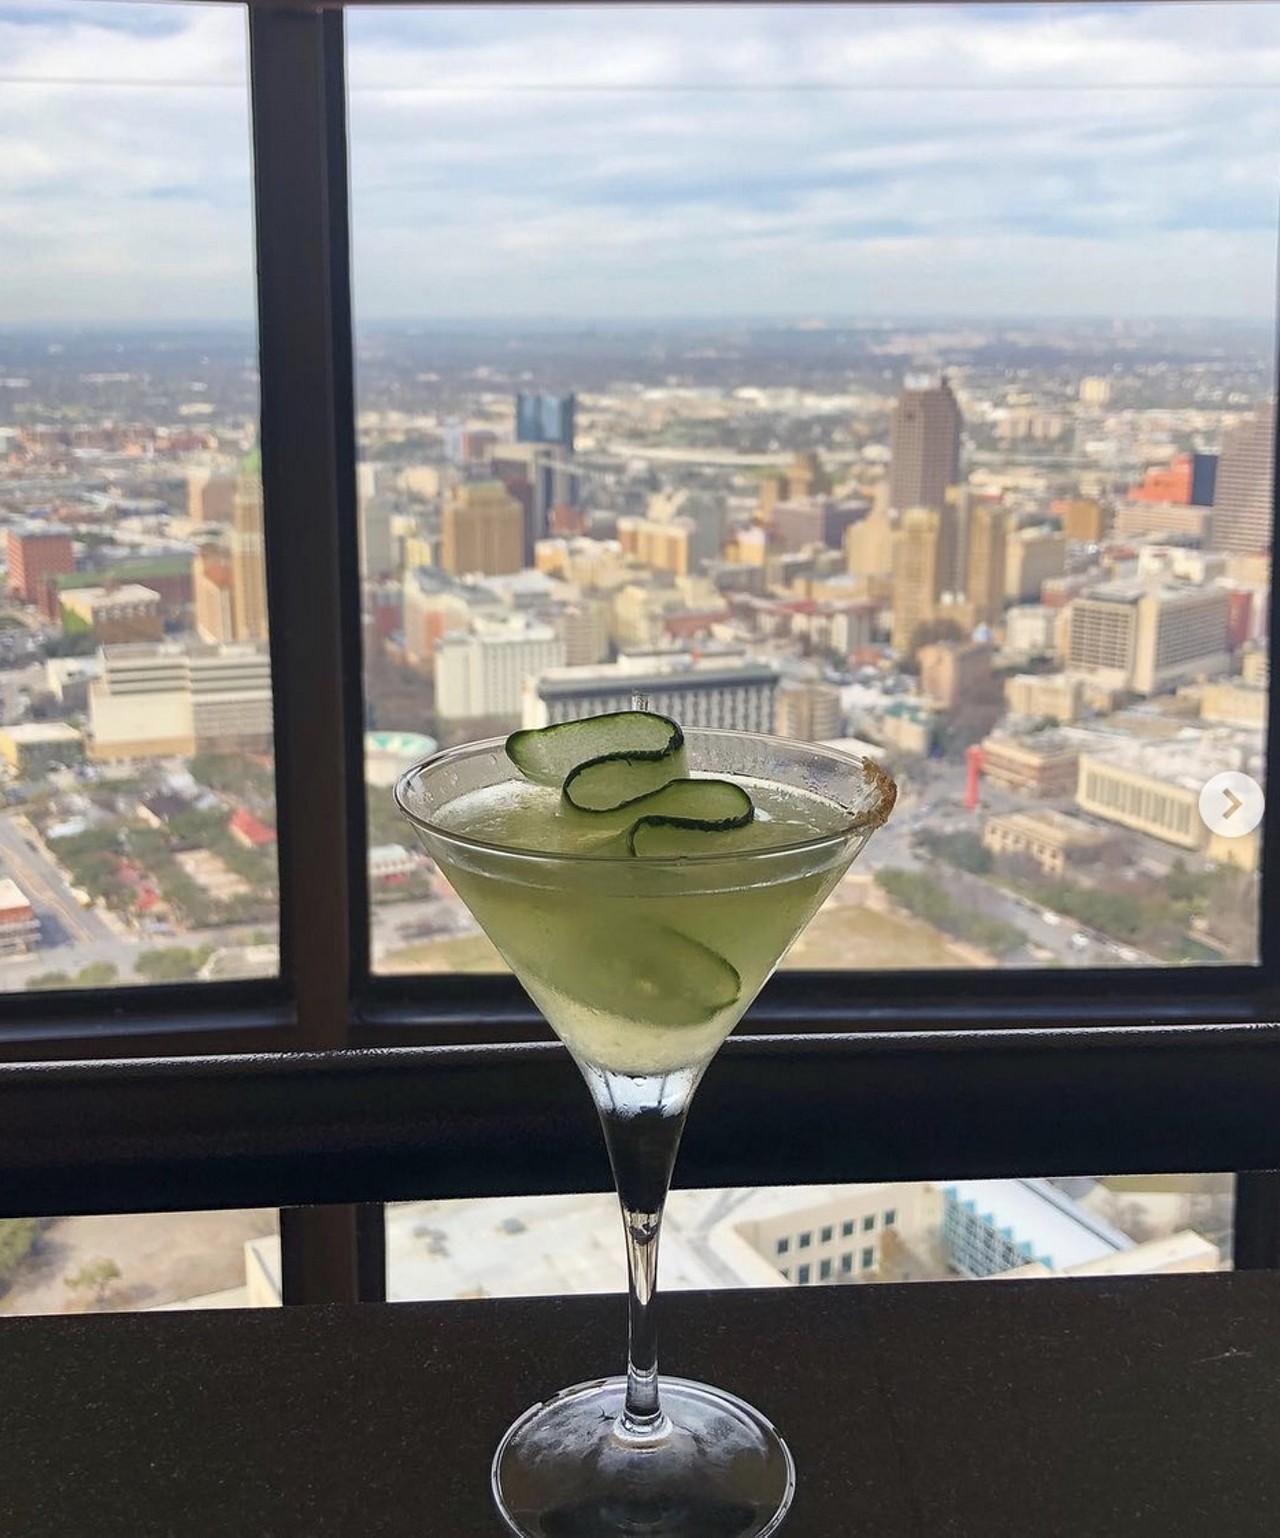 7. Bar 601 at the Tower of the Americas
Soaring 750 feet above the Alamo City, Bar 601's key attraction is its killer view. Snag a bar seat in the stationary lounge while the attached restaurant rotates slowly, giving diners a panoramic view of the cityscape. Whether you're showing out-of-towners the lay of the land or wooing a new potential boo, the visuals make for an icebreaker that's hard to beat. Sip on a well-balanced pomegranate martini or a glass of wine while you try to spot your favorite landmarks from the sky. 739 E. C&eacute;sar E. Ch&aacute;vez Blvd., (210) 223-3101, toweroftheamericas.com.
Photo via Instagram / cease_dls